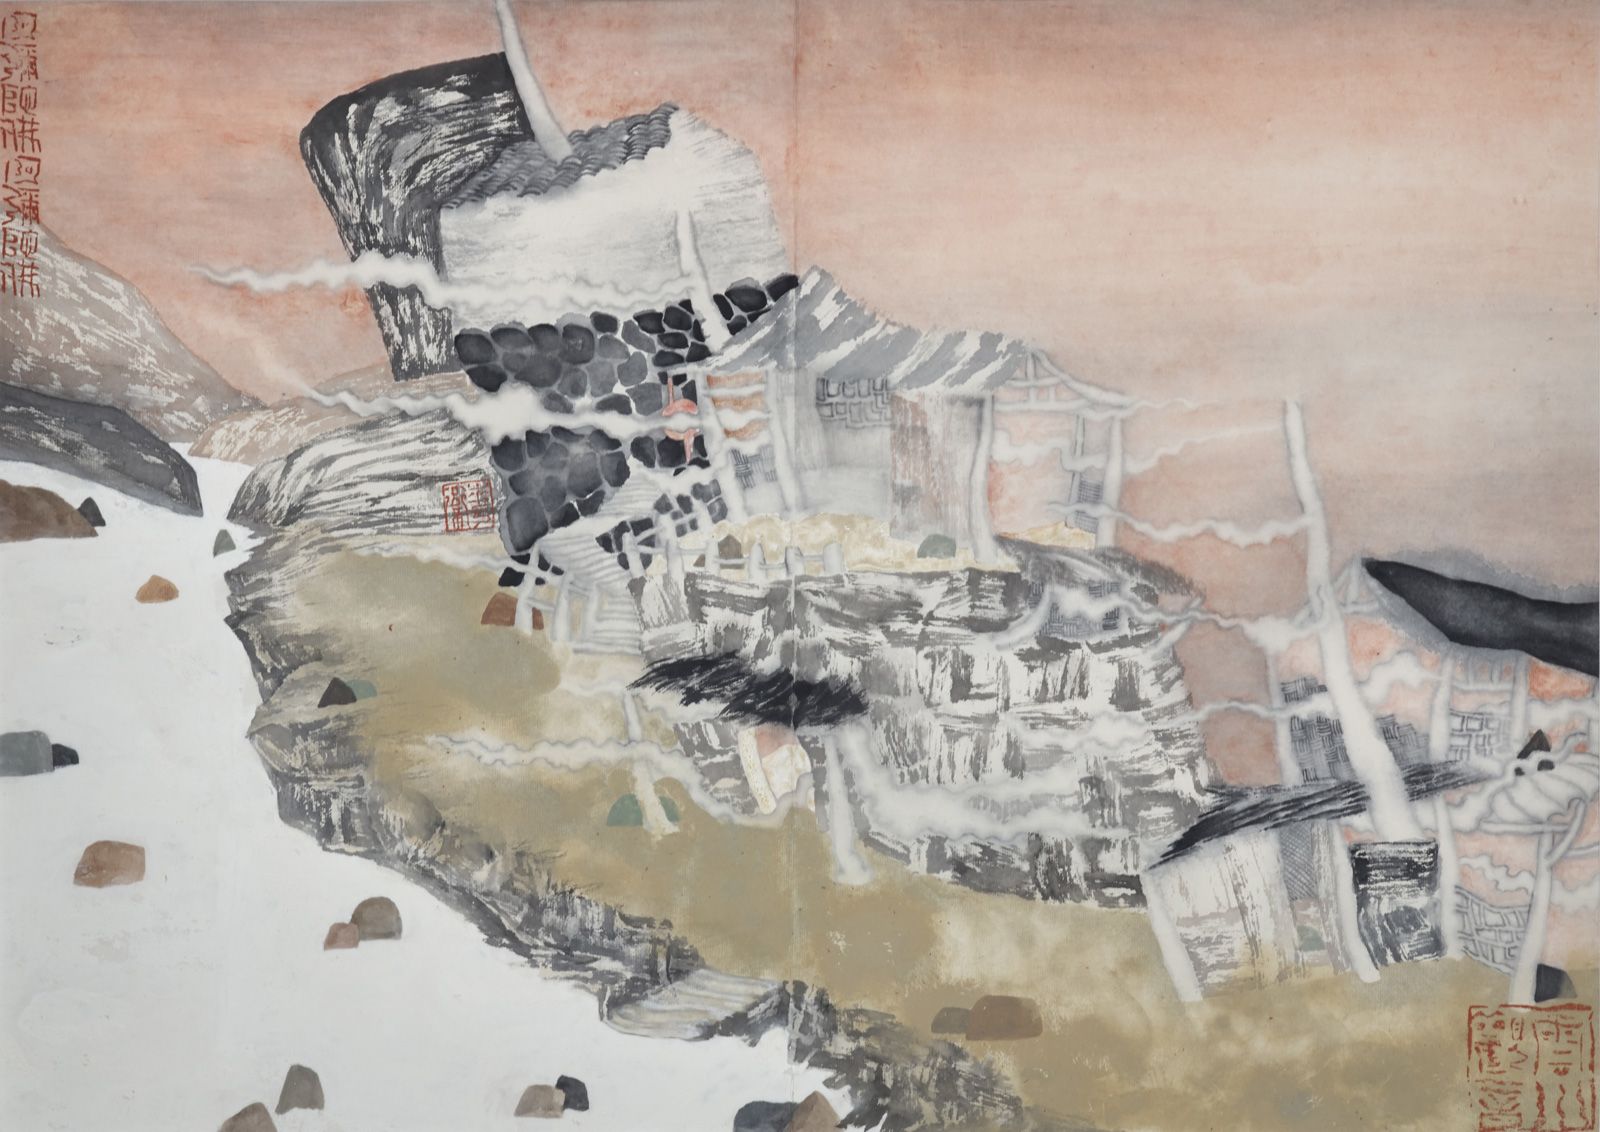 GUO Huawei (1983) The River of Serenity, 2007
Ink and acrylic on rice paper, art&hellip;